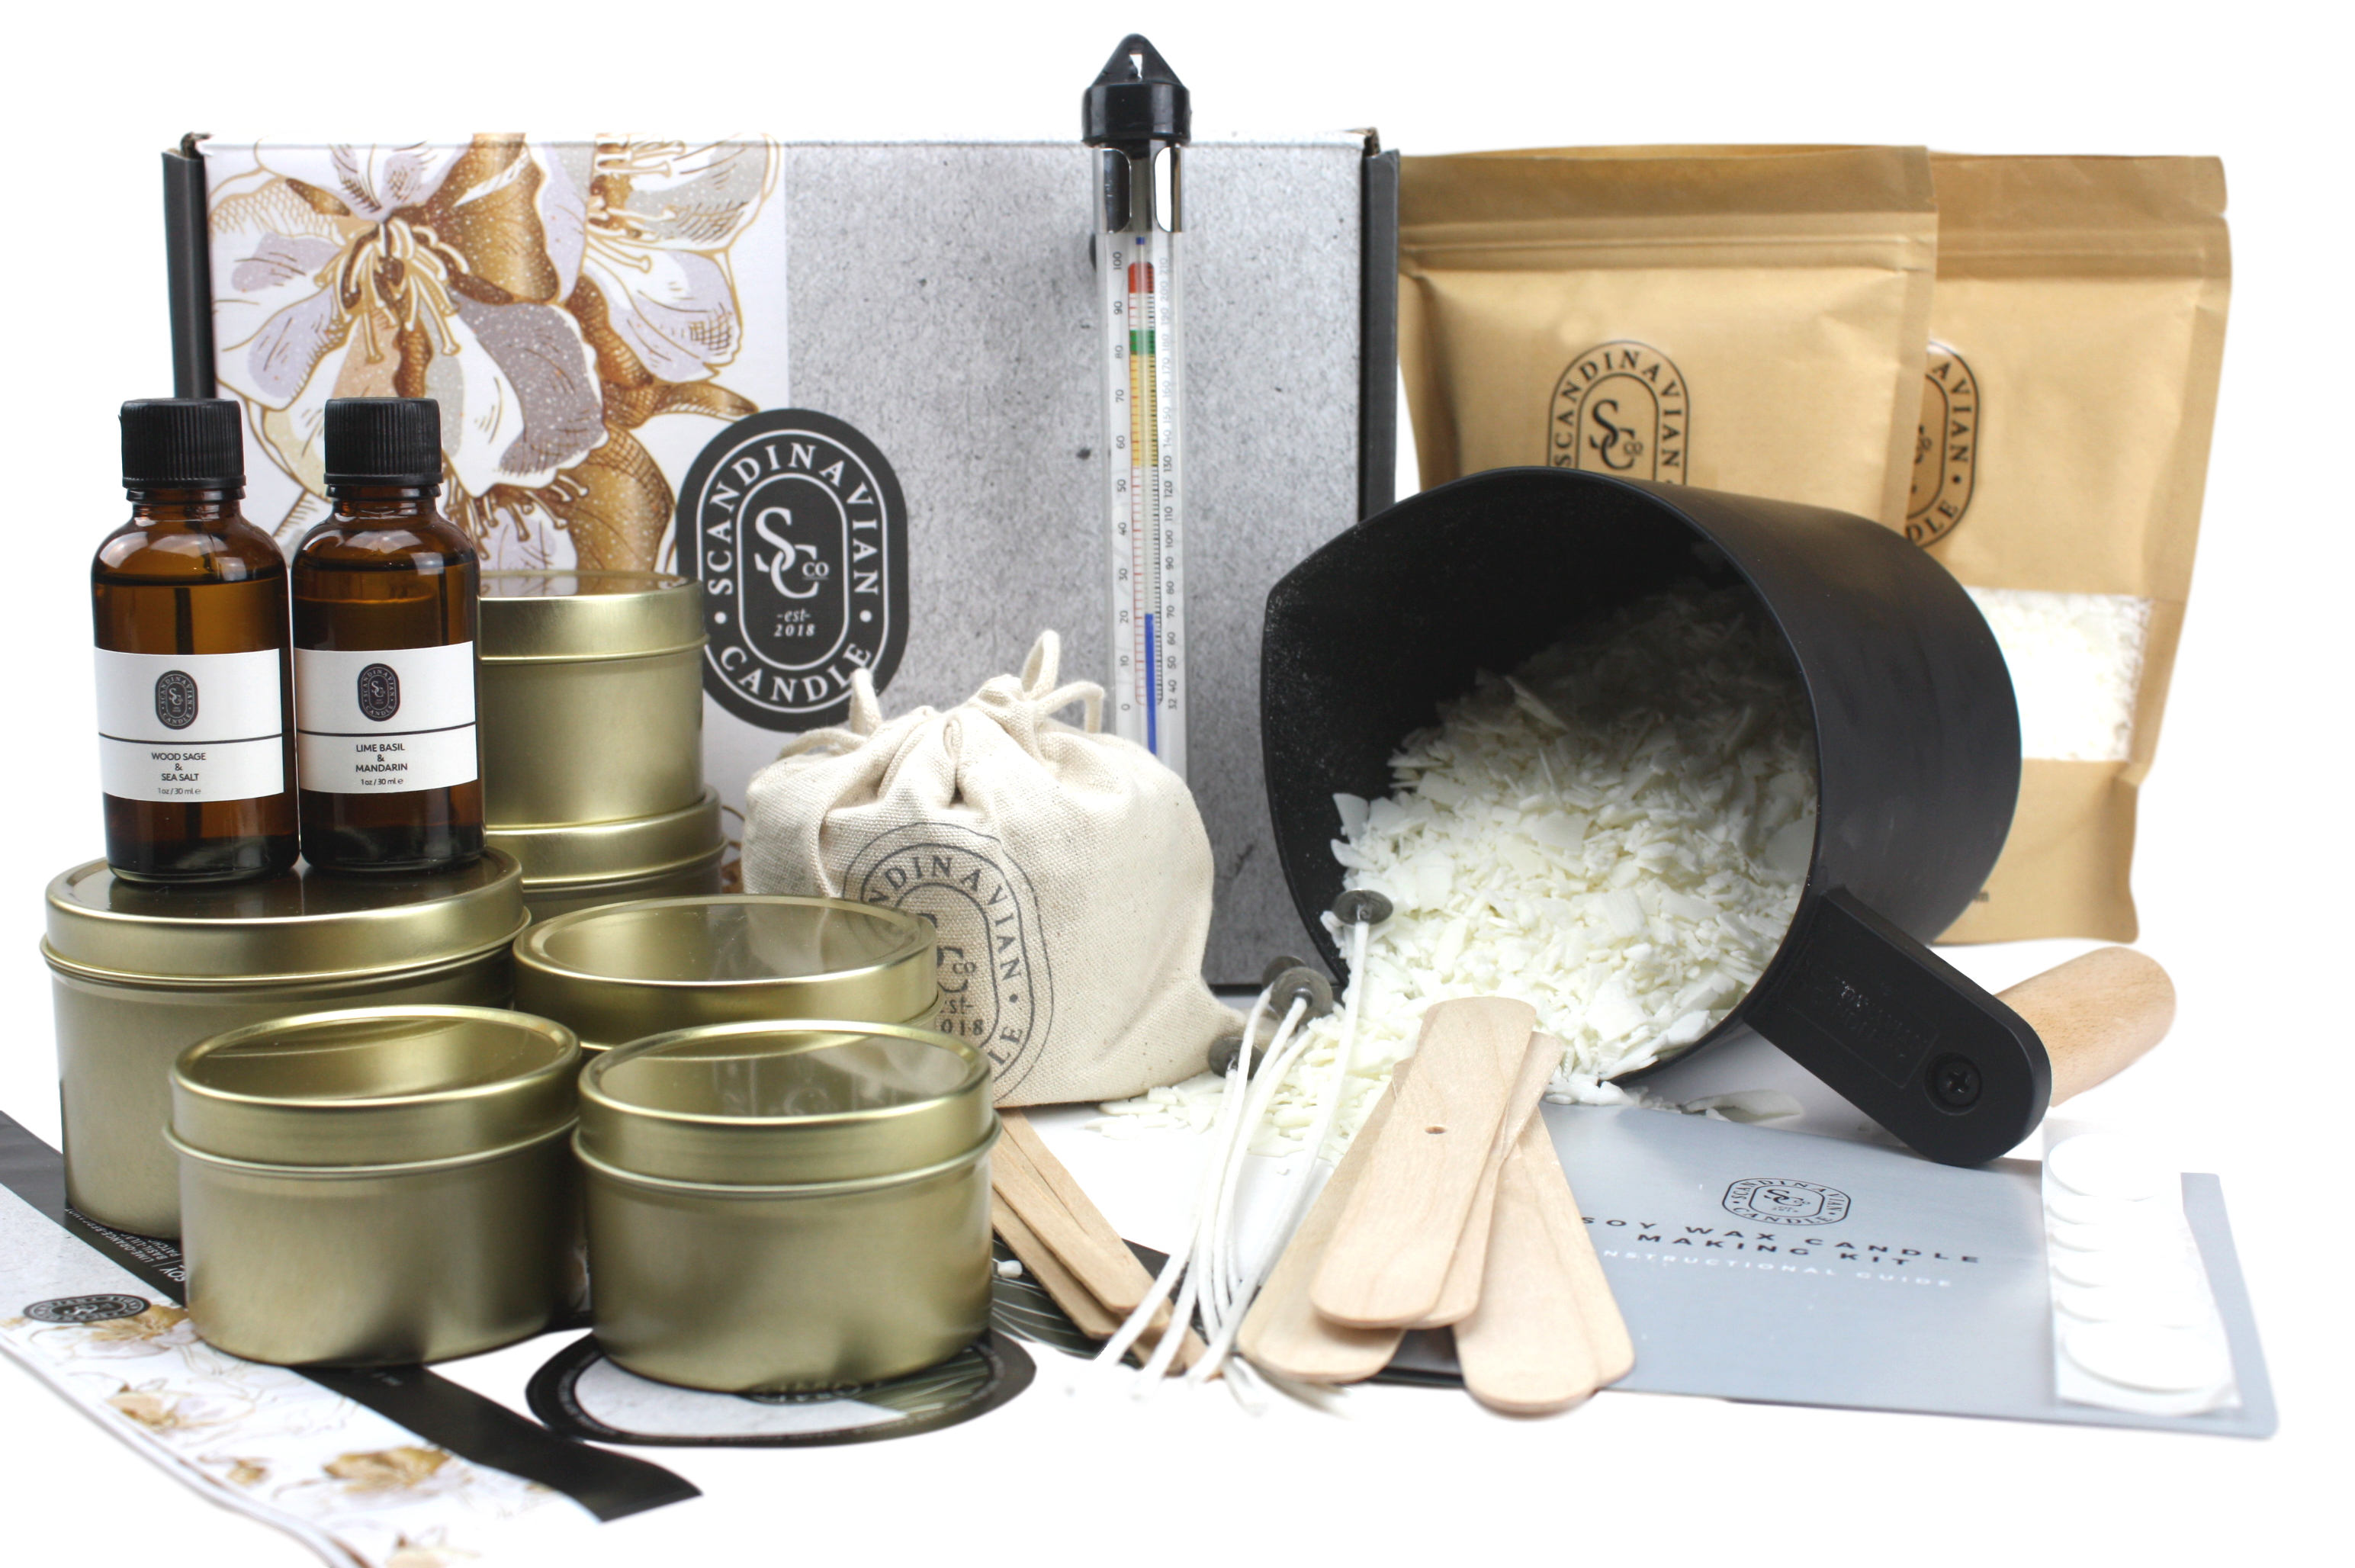 Best candle making kits to buy now